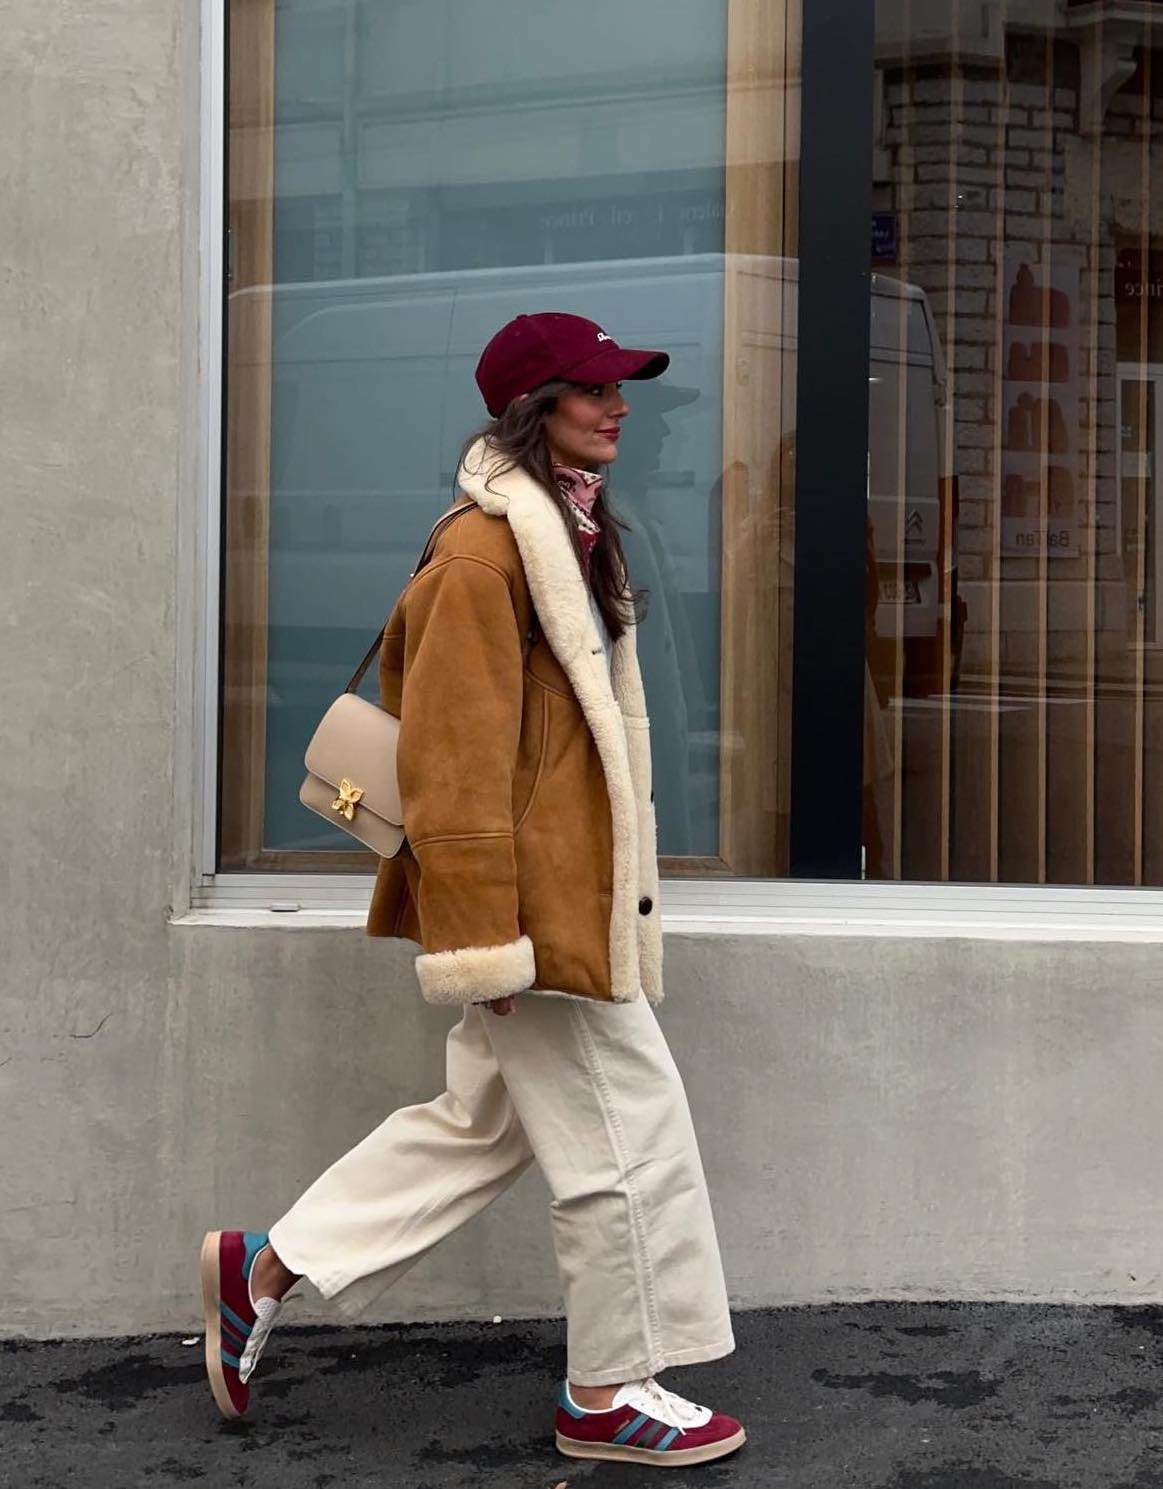 Baggy white jeans with a brown shearing jacket, burgundy Adidas sneakers and a burgundy cap.